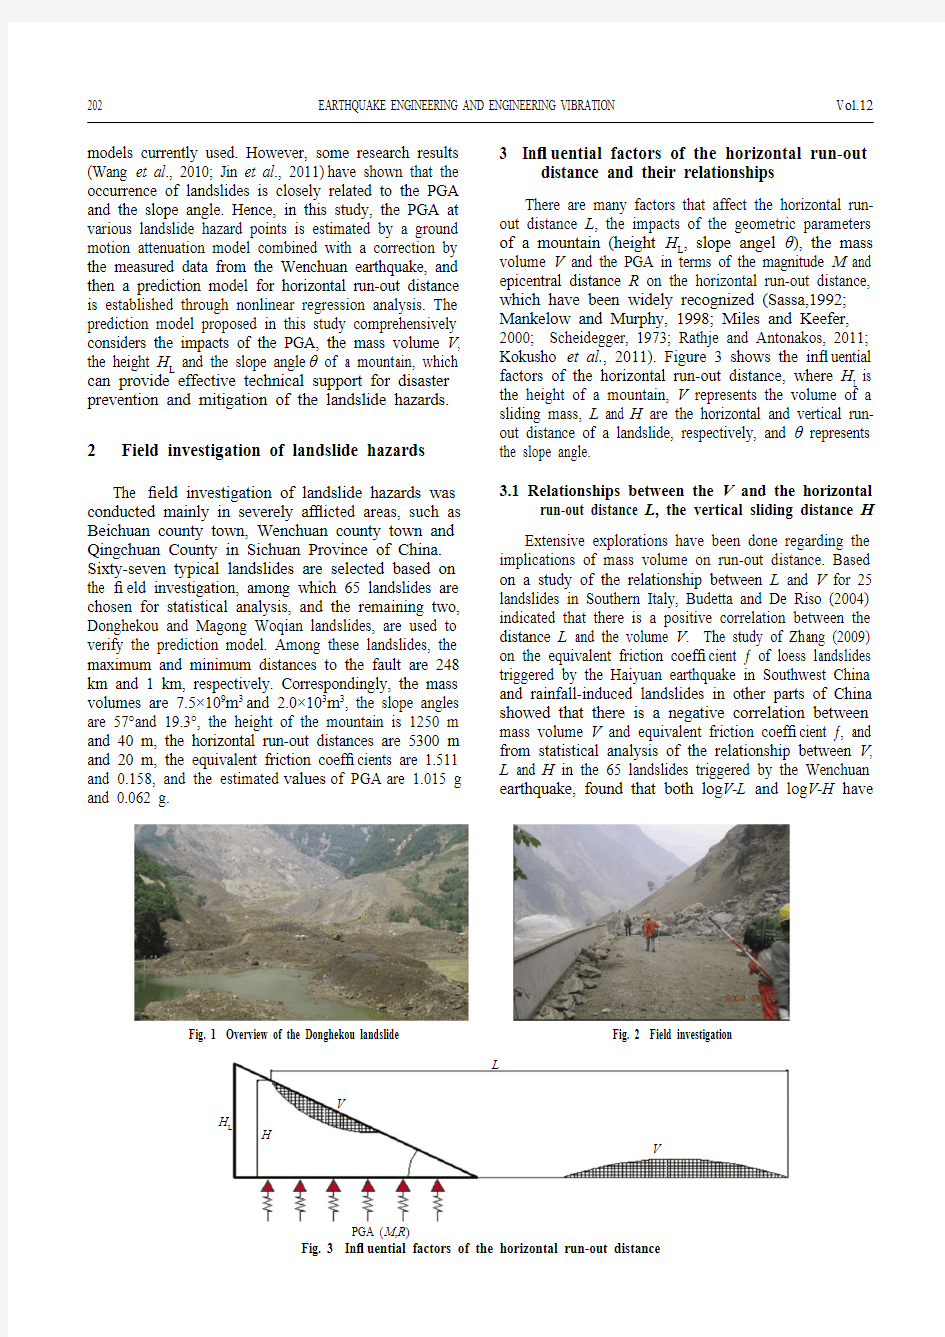 A prediction model for horizontal run-out distance of landslides triggered by Wenchuan earthquake